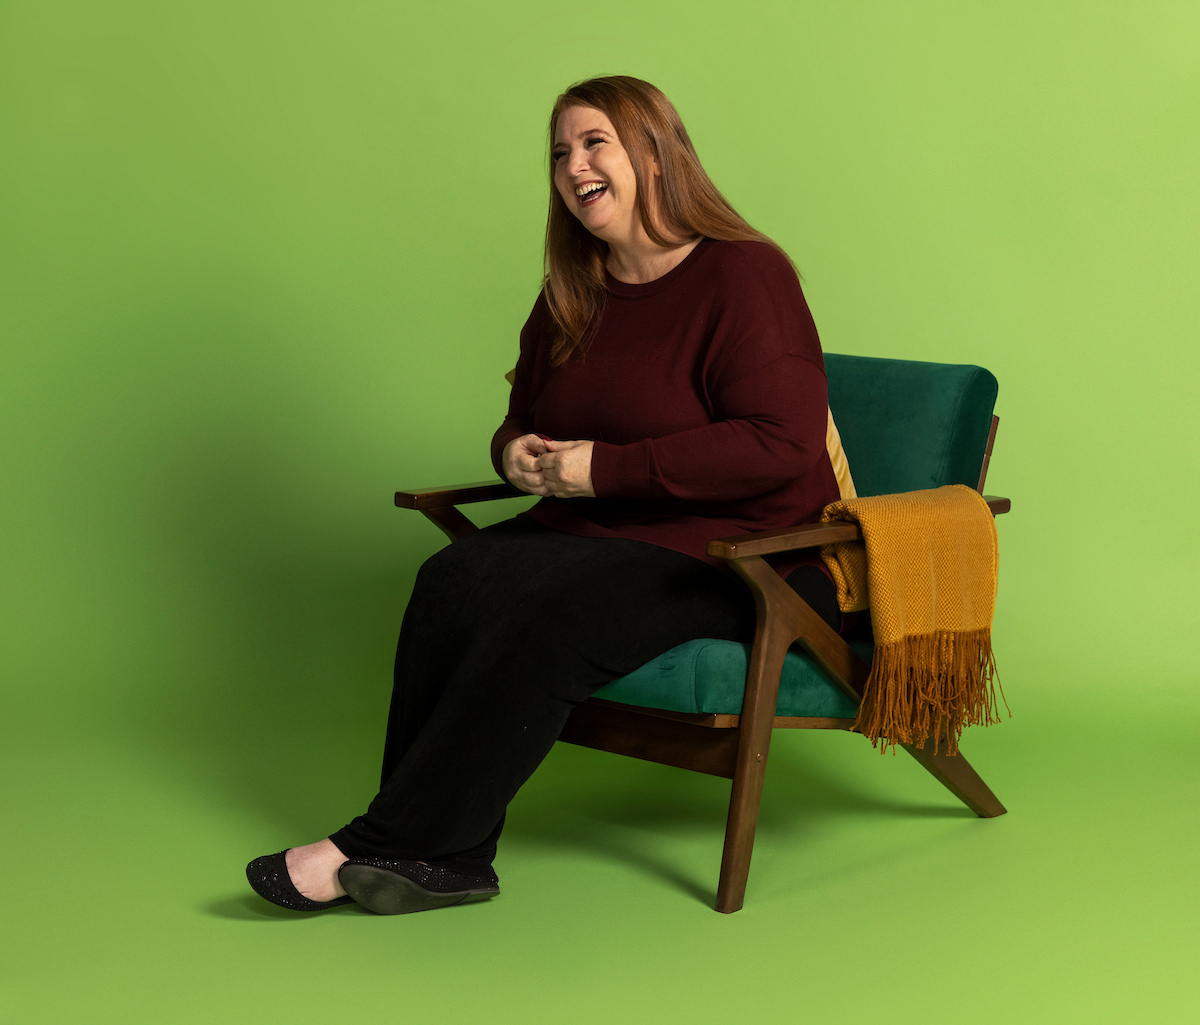 Woman Laughing in a chair